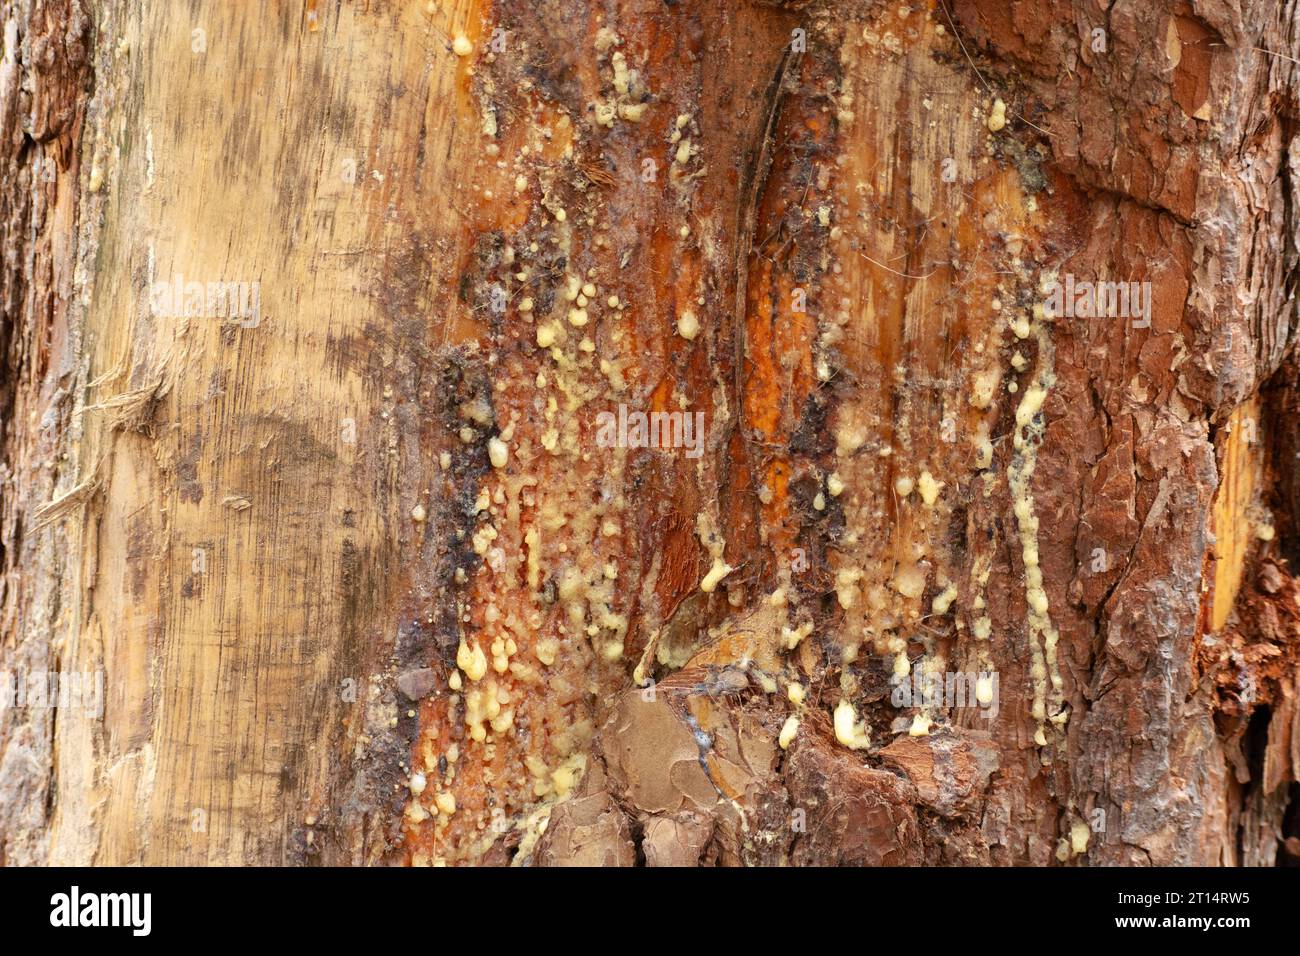 Sticky light resin on the trunk of a wounded tree, spring view Stock Photo